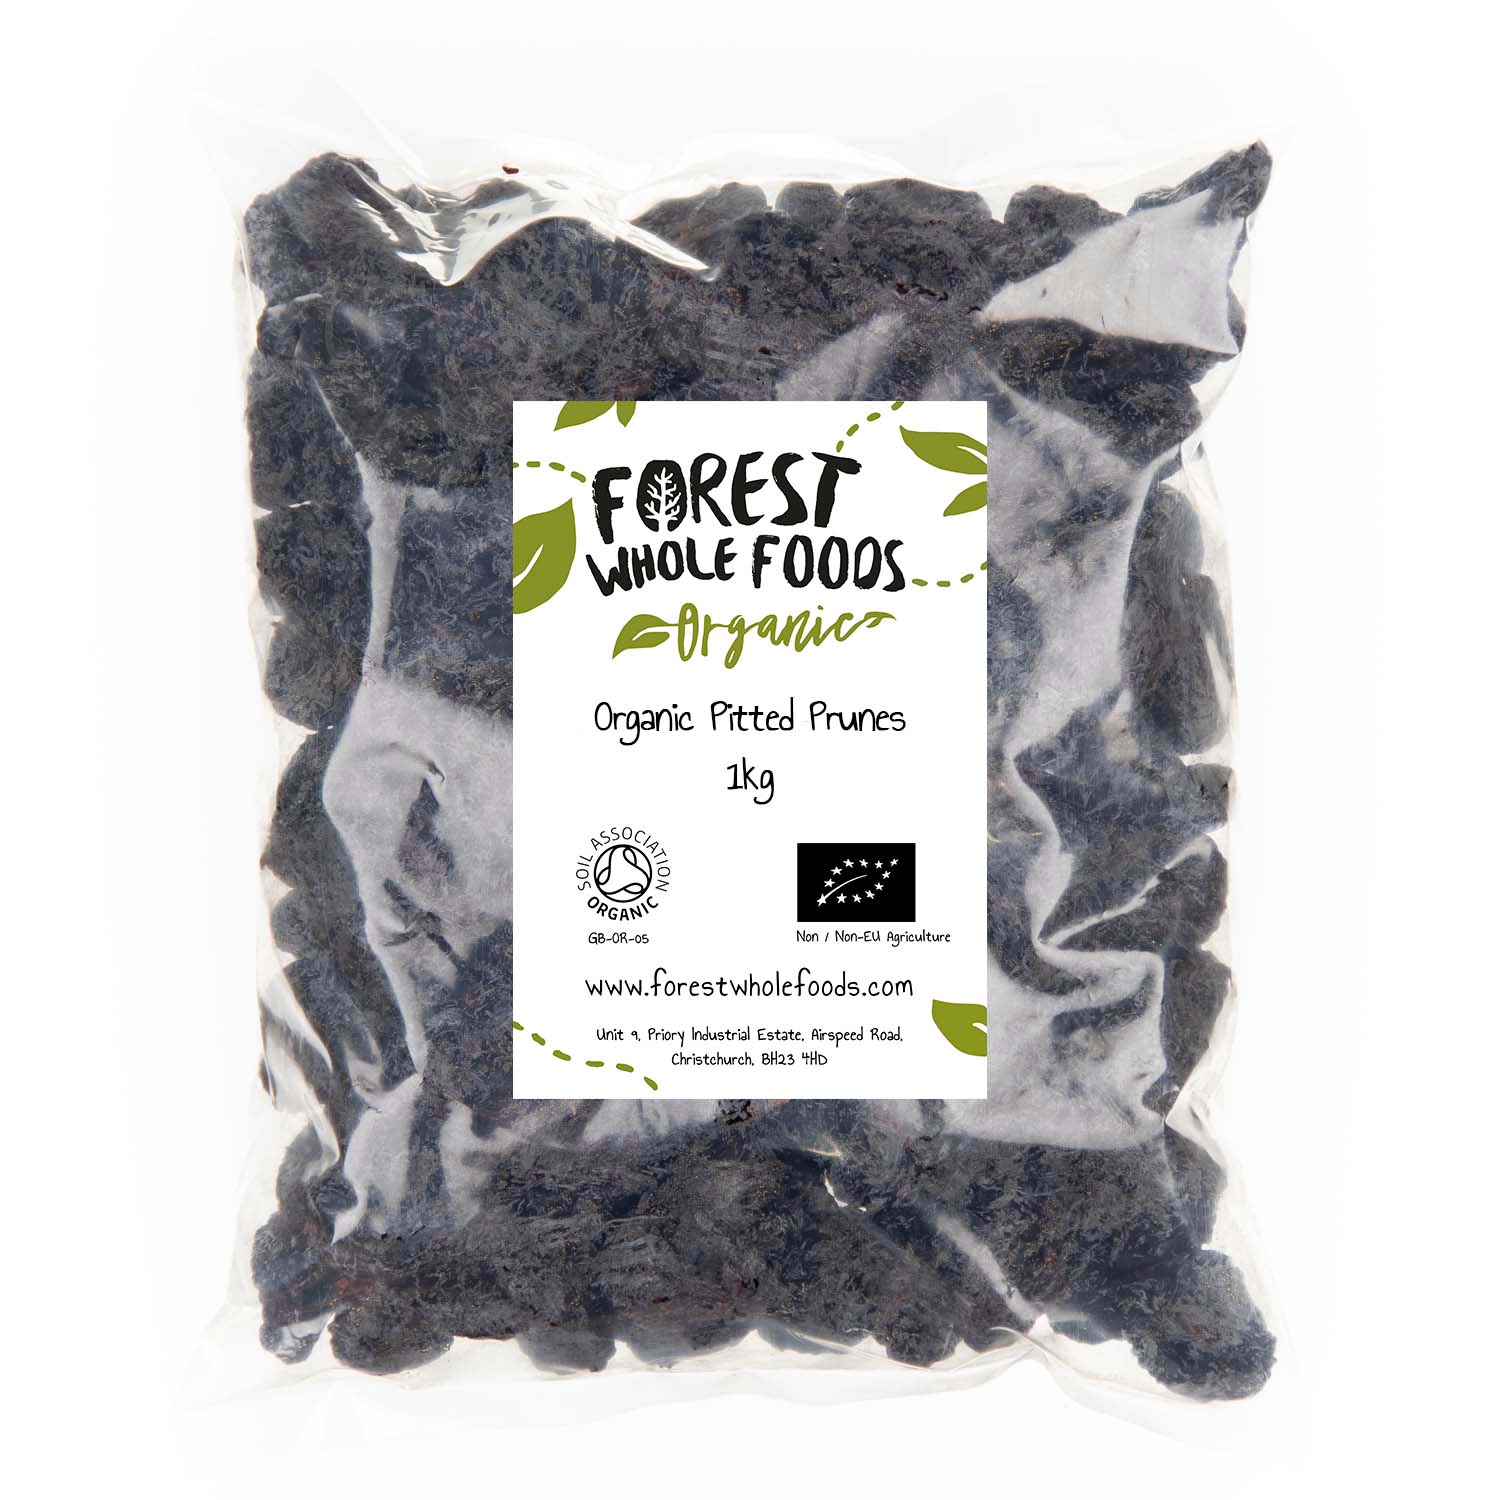 Organic Pitted Prunes 1kg